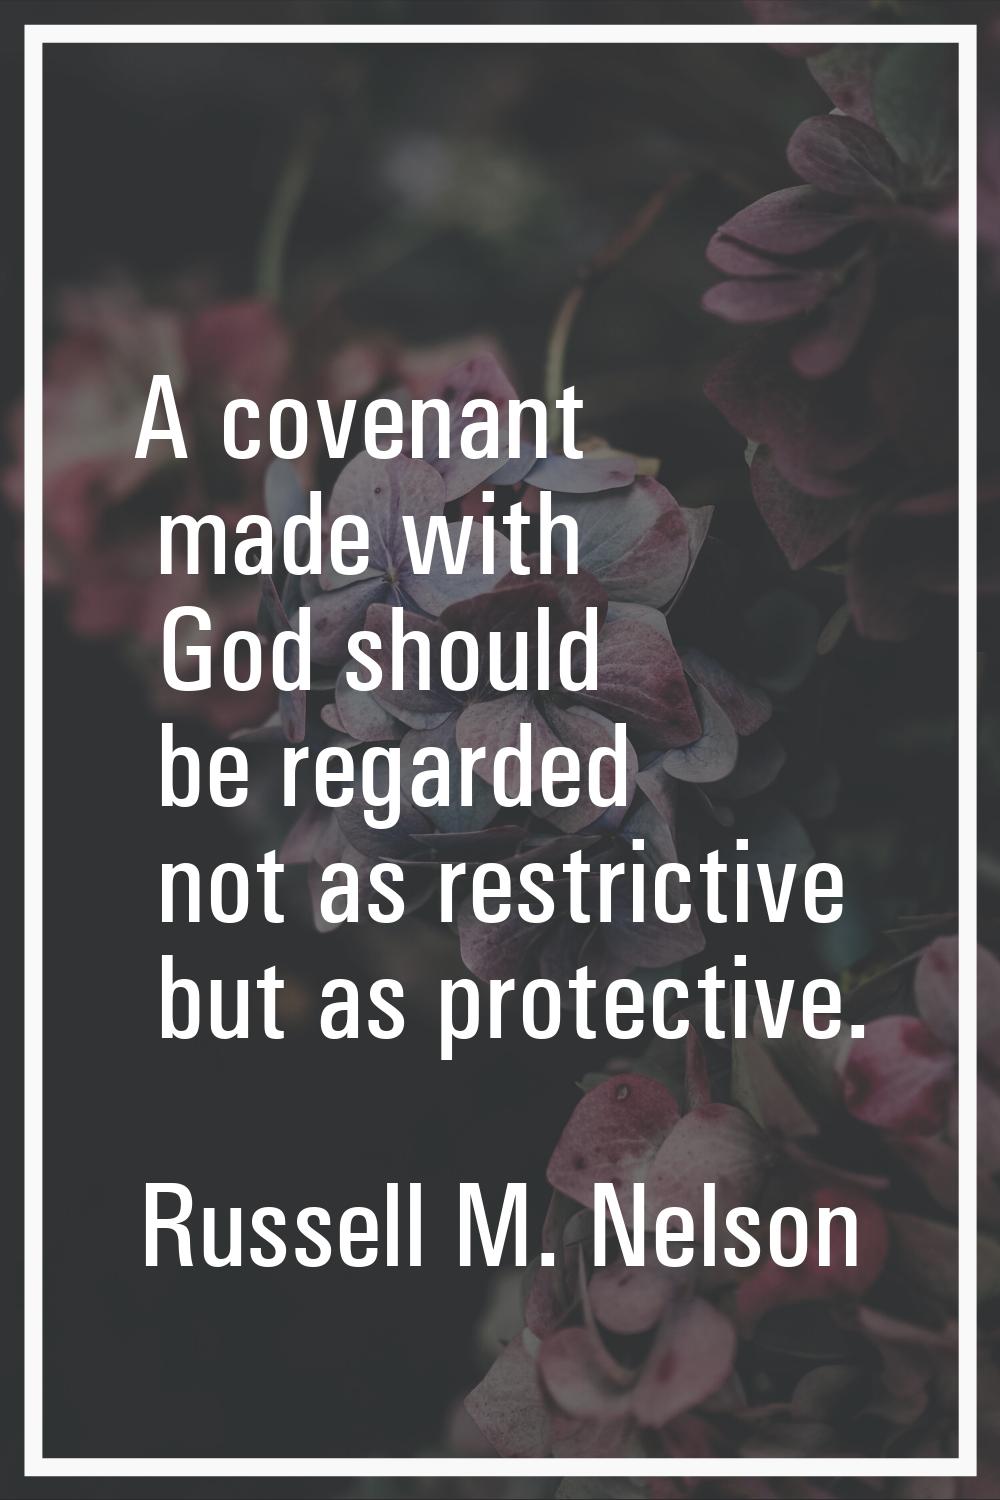 A covenant made with God should be regarded not as restrictive but as protective.